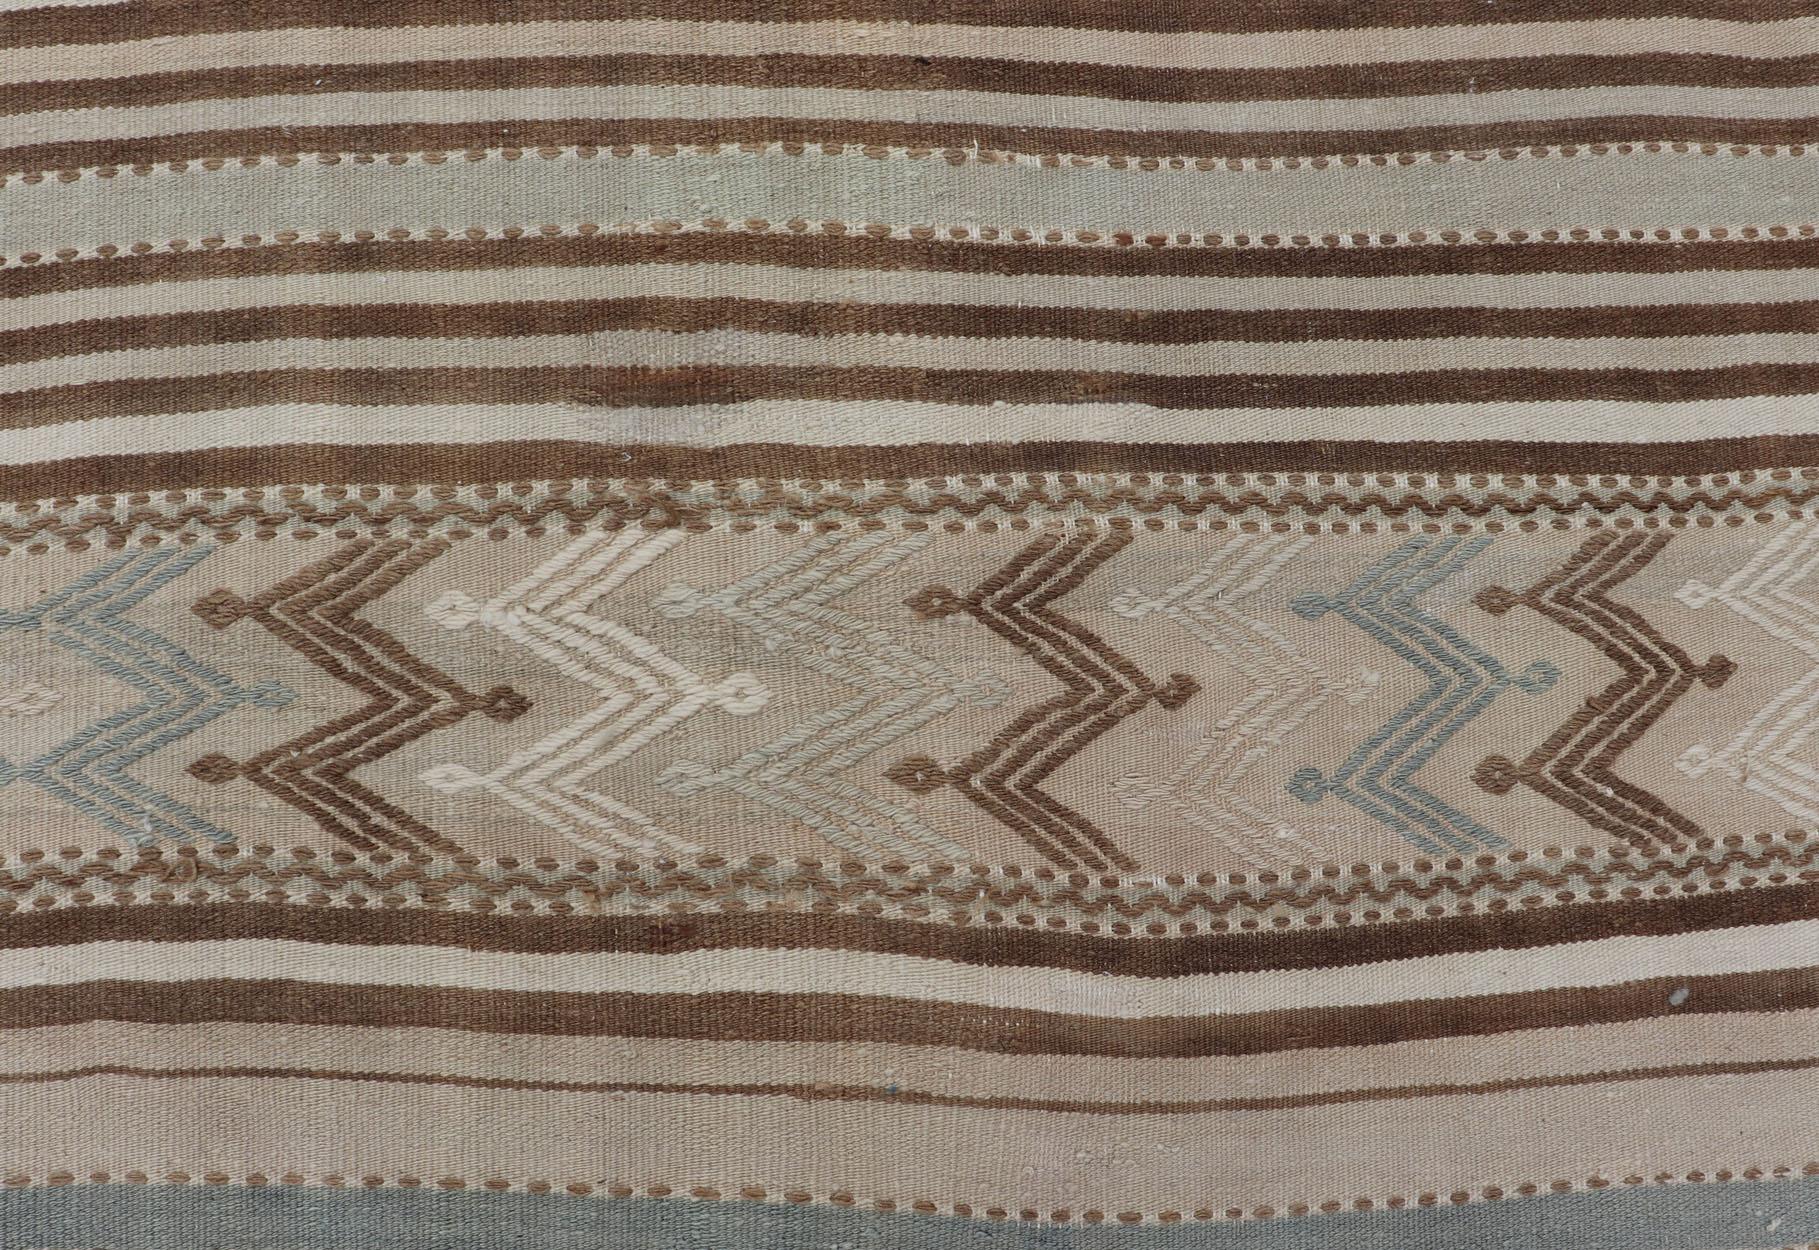 20th Century Turkish Hand Woven Flat-Weave Embroideries Kilim in Taupe, Brown, and Lt. Blue  For Sale